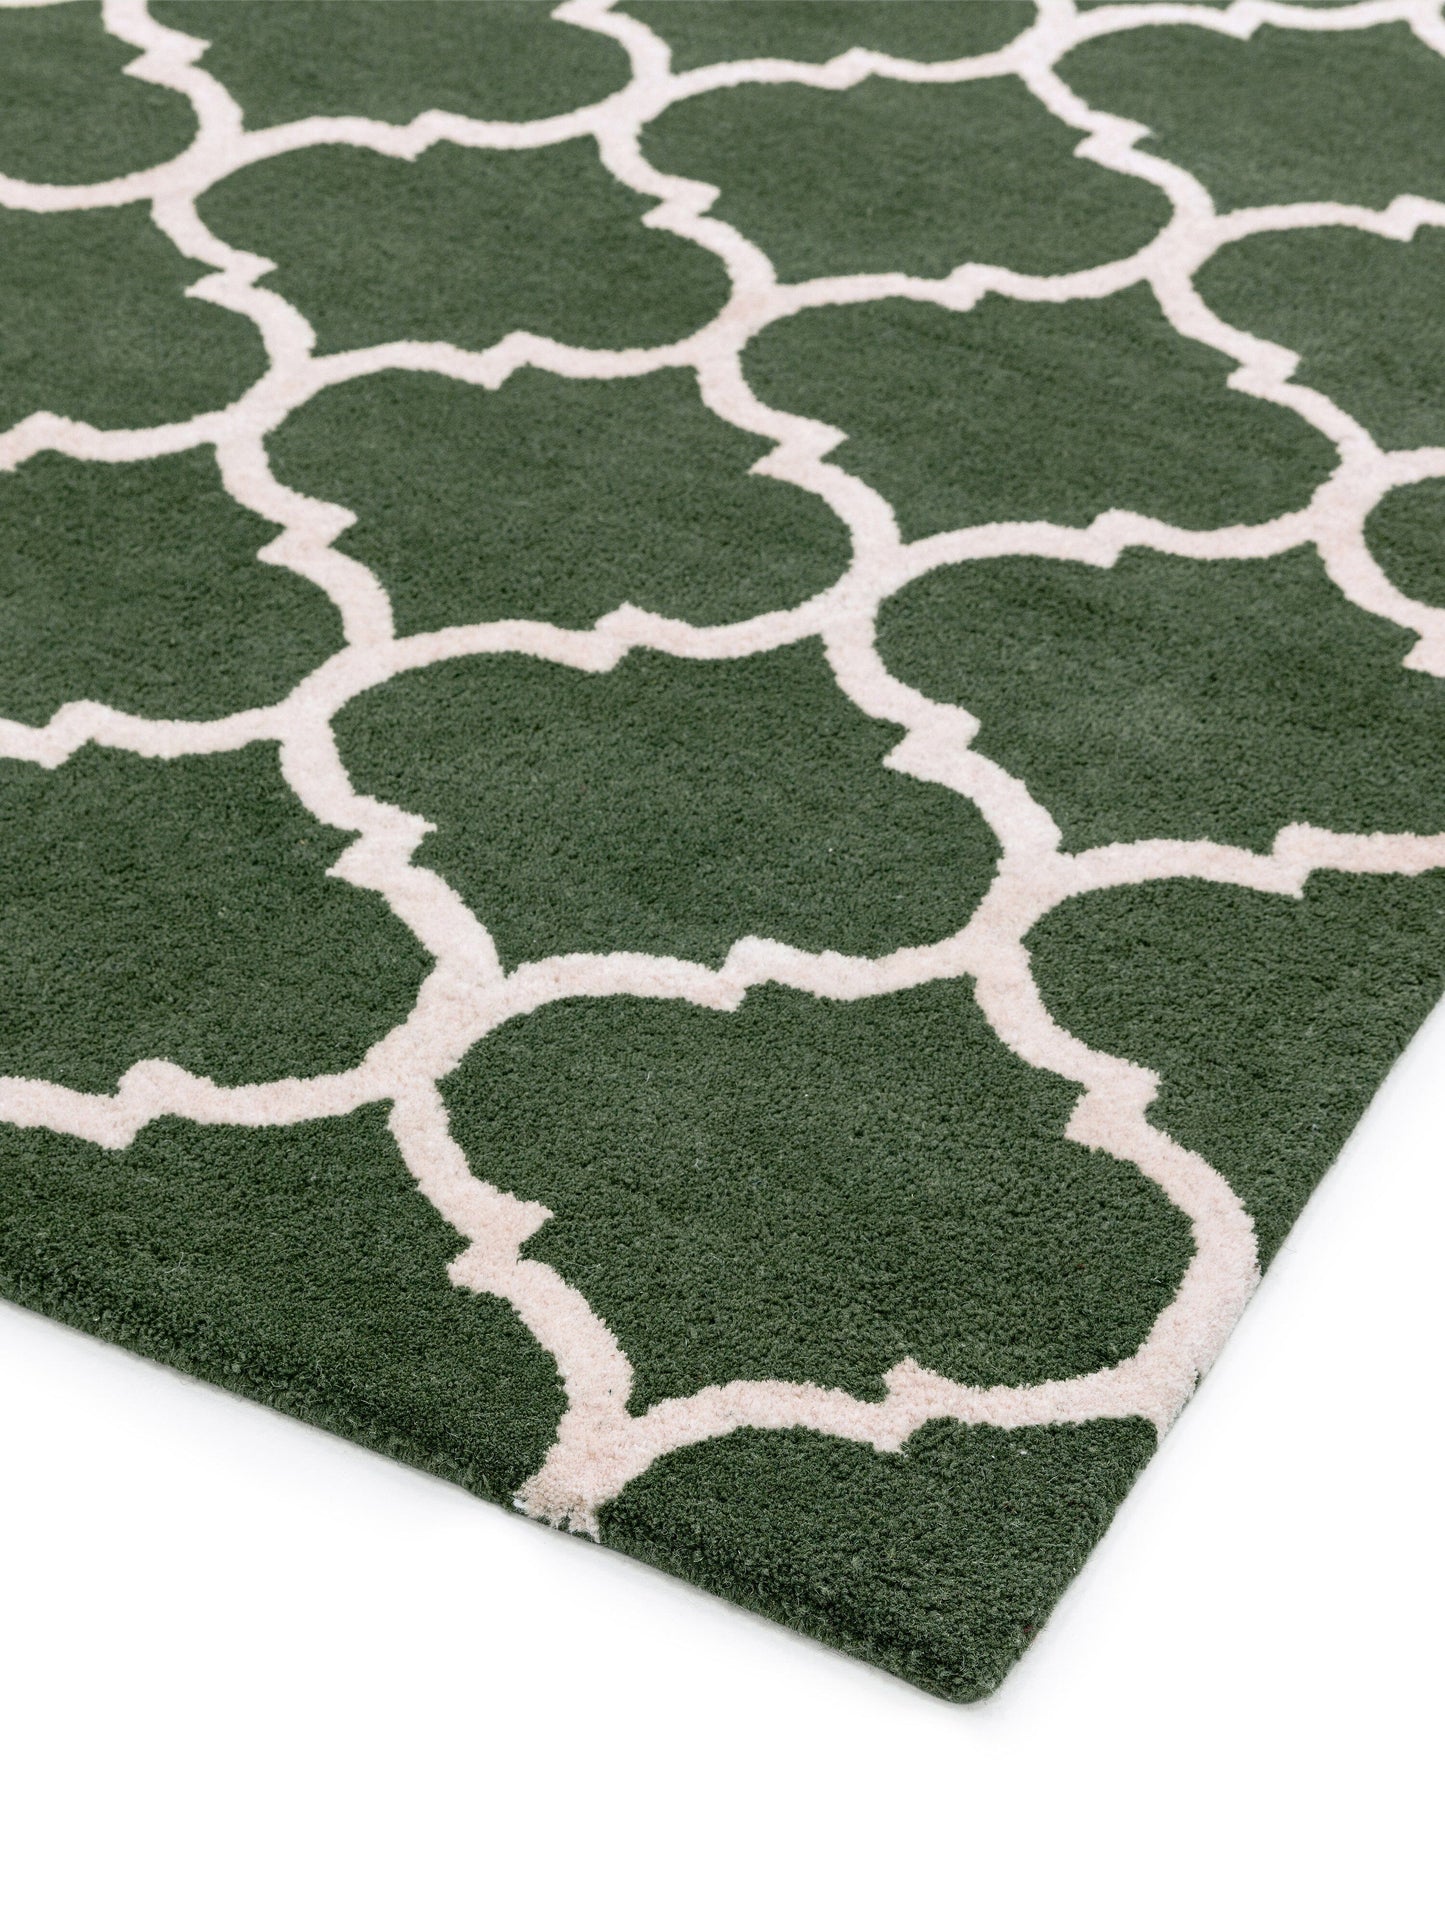 Asiatic Carpets Albany Handtufted Rug Ogee Green - 80 x 150cm